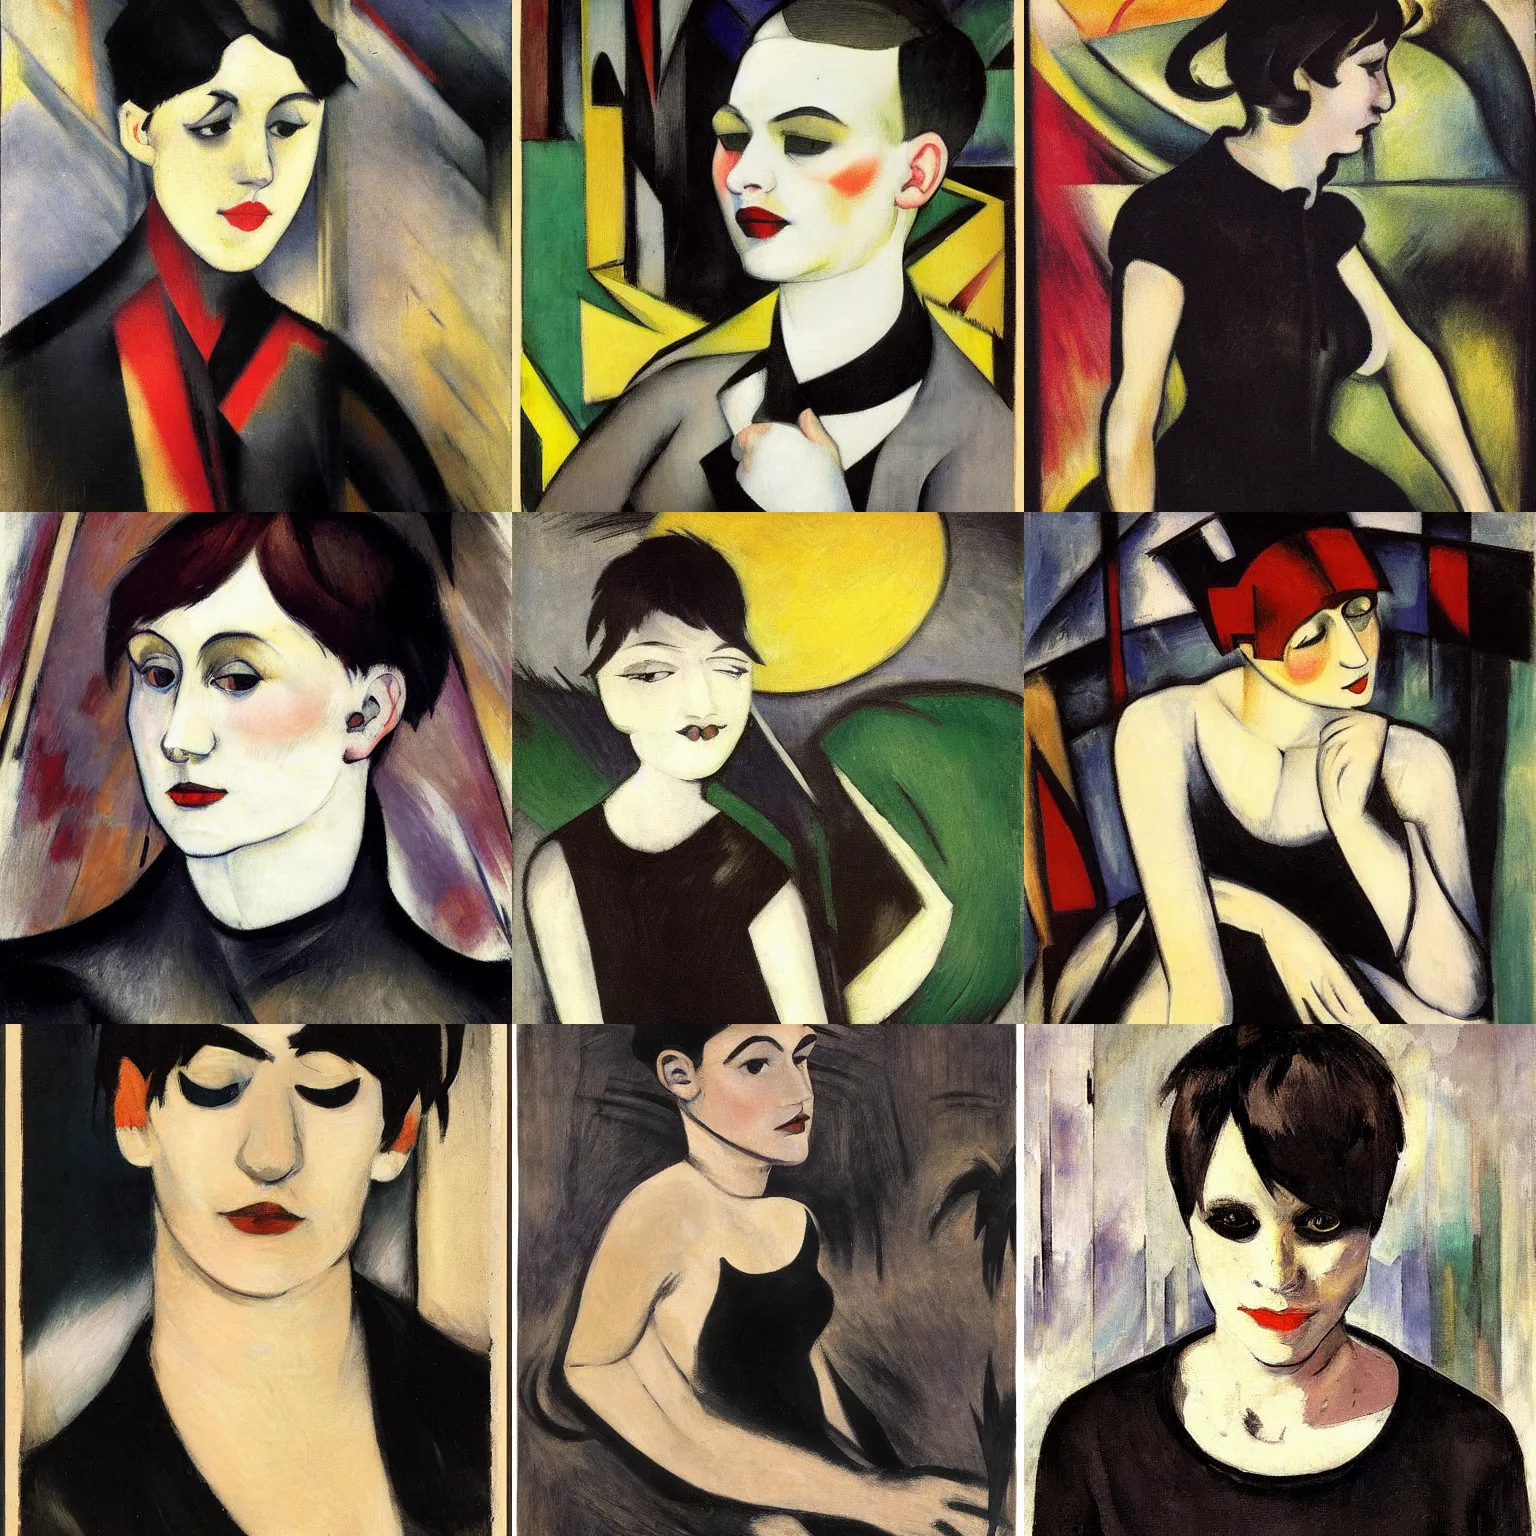 Prompt: A goth painted by Franz Marc. Her hair is dark brown and cut into a short, messy pixie cut. She has a slightly rounded face, with a pointed chin, large entirely-black eyes, and a small nose. She is wearing a black tank top, a black leather jacket, a black knee-length skirt, a black choker, and black leather boots.